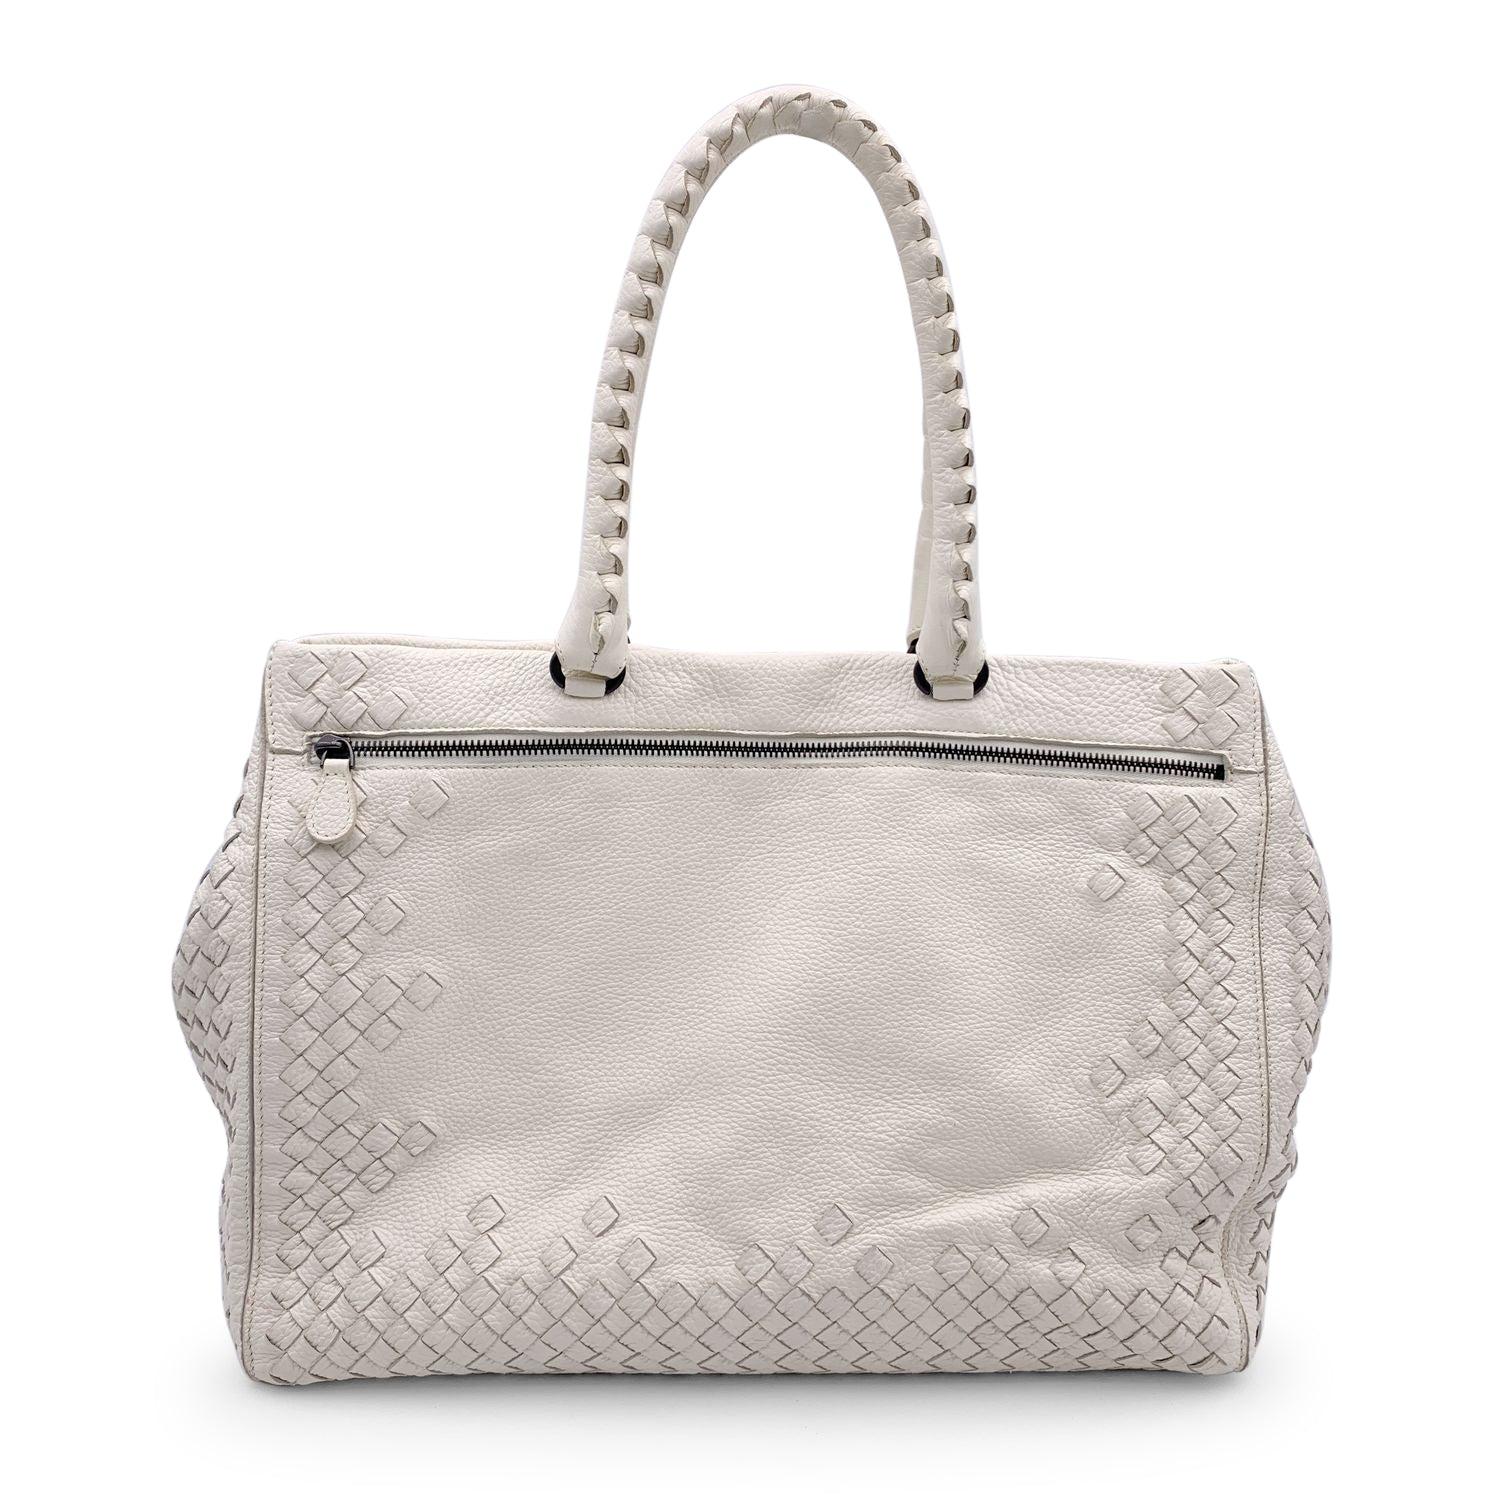 Bottega Veneta White leather tote bag with intrecciato parts. Magnetic button closure on top. 2 exterior zip pockets. Suede lining shoulder bag. Magnetic button closure. Beige suede lining. 2 side zip pockets inside. 'Bottega Veneta - Made in Italy'